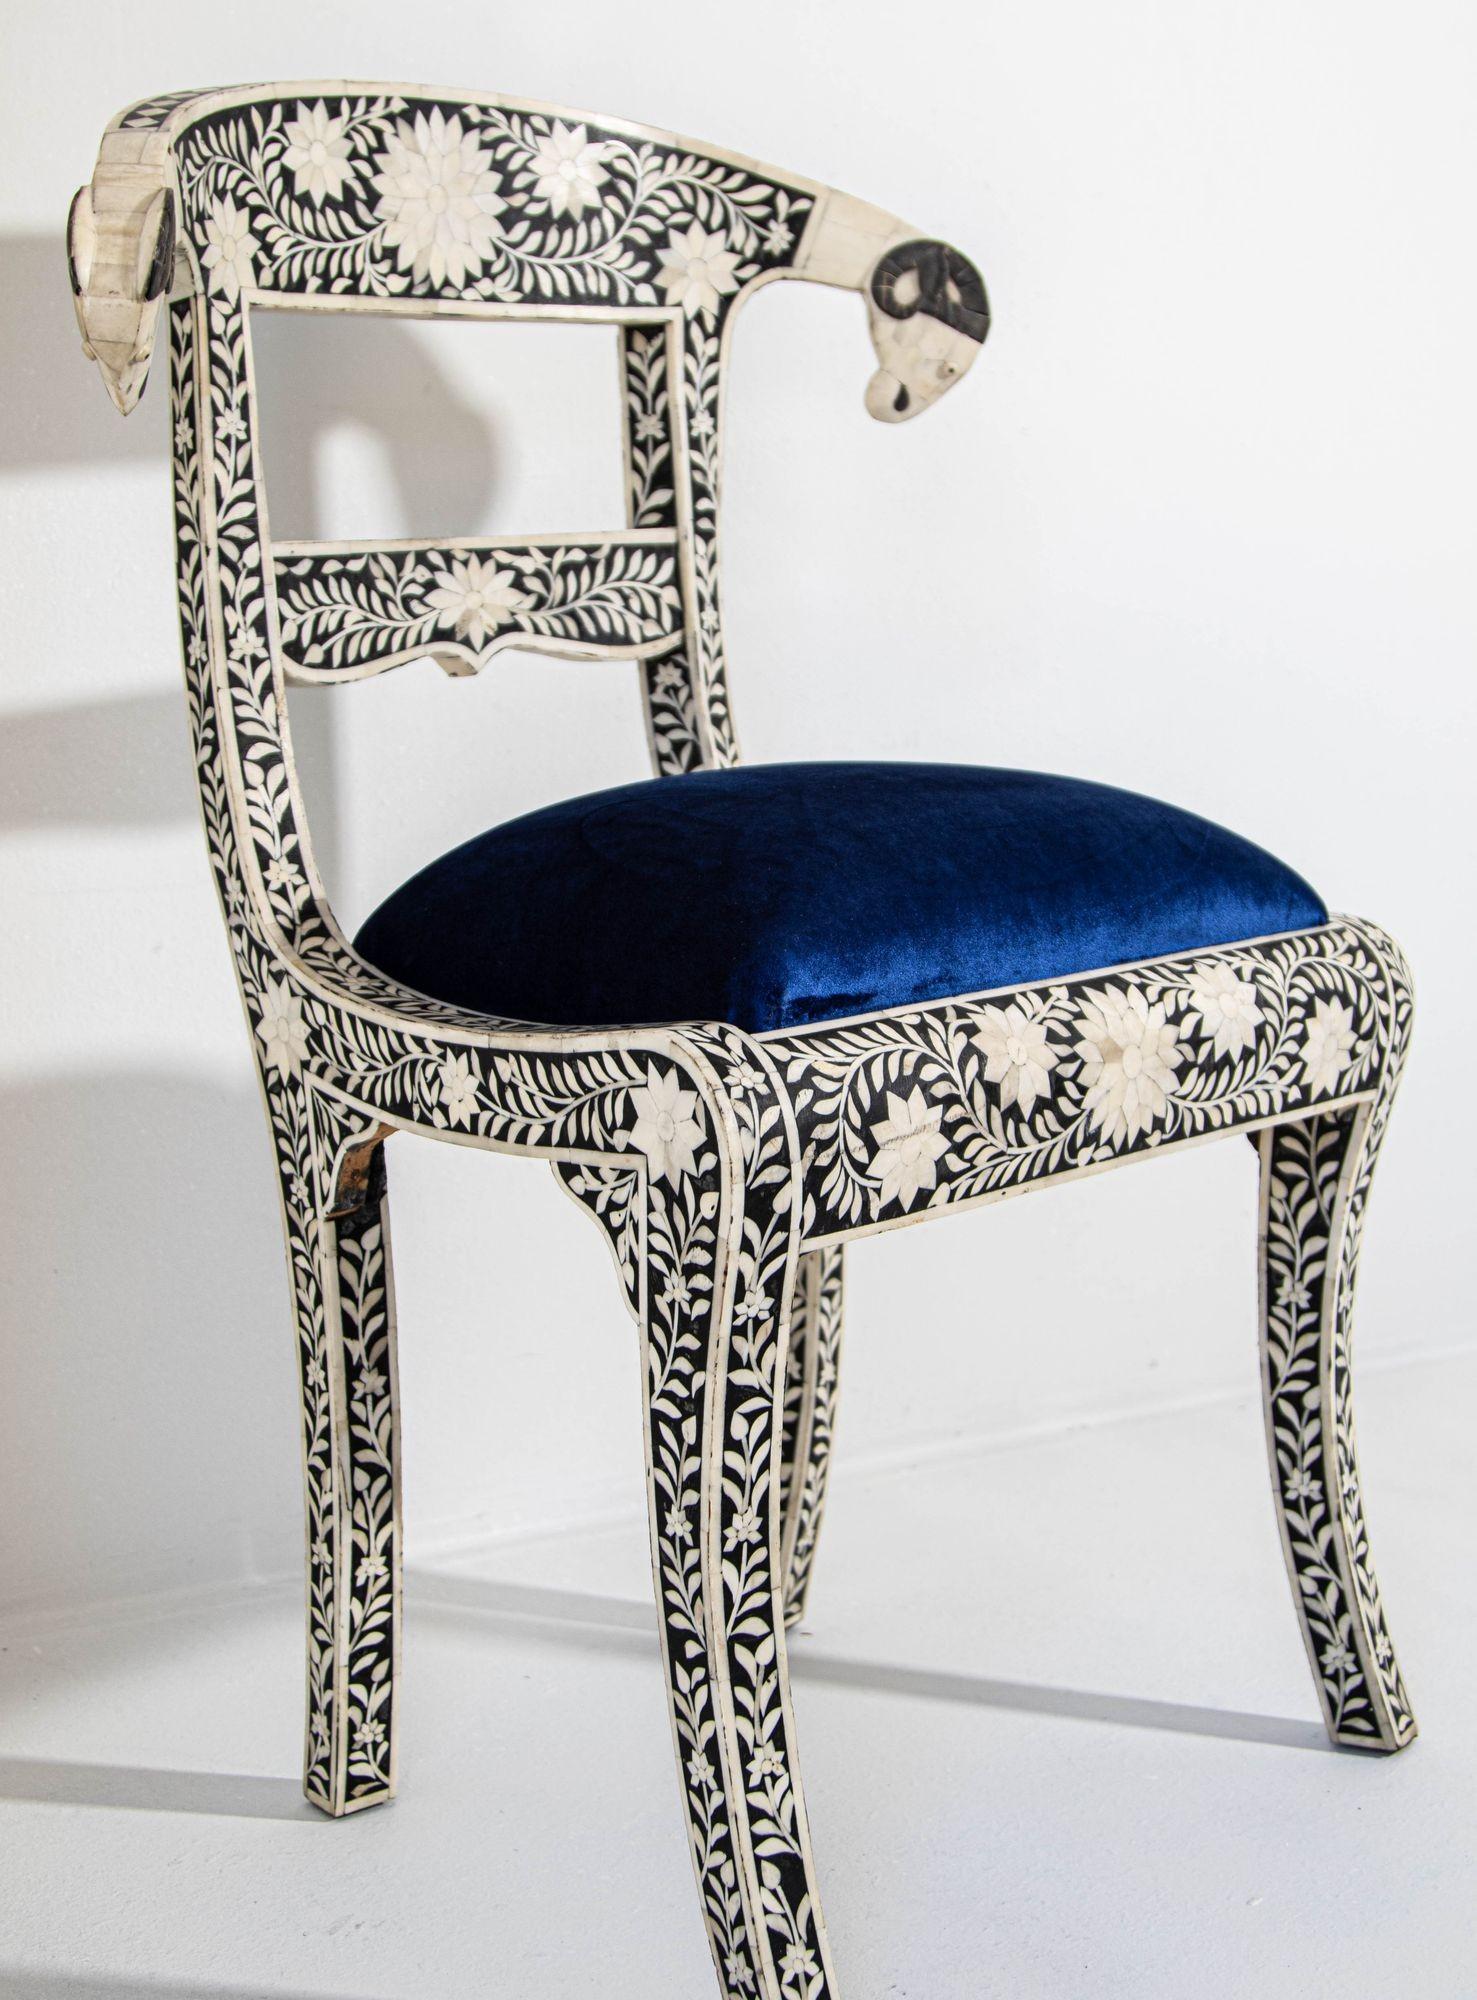 Anglo-Indian black and white dowry side chair with ram's head.
This stunning chair feature a wooden frame inlaid with intricate and detailed floral design in white and black color and scrolling ram's heads finish.
Seat is upholstered in a royal blue